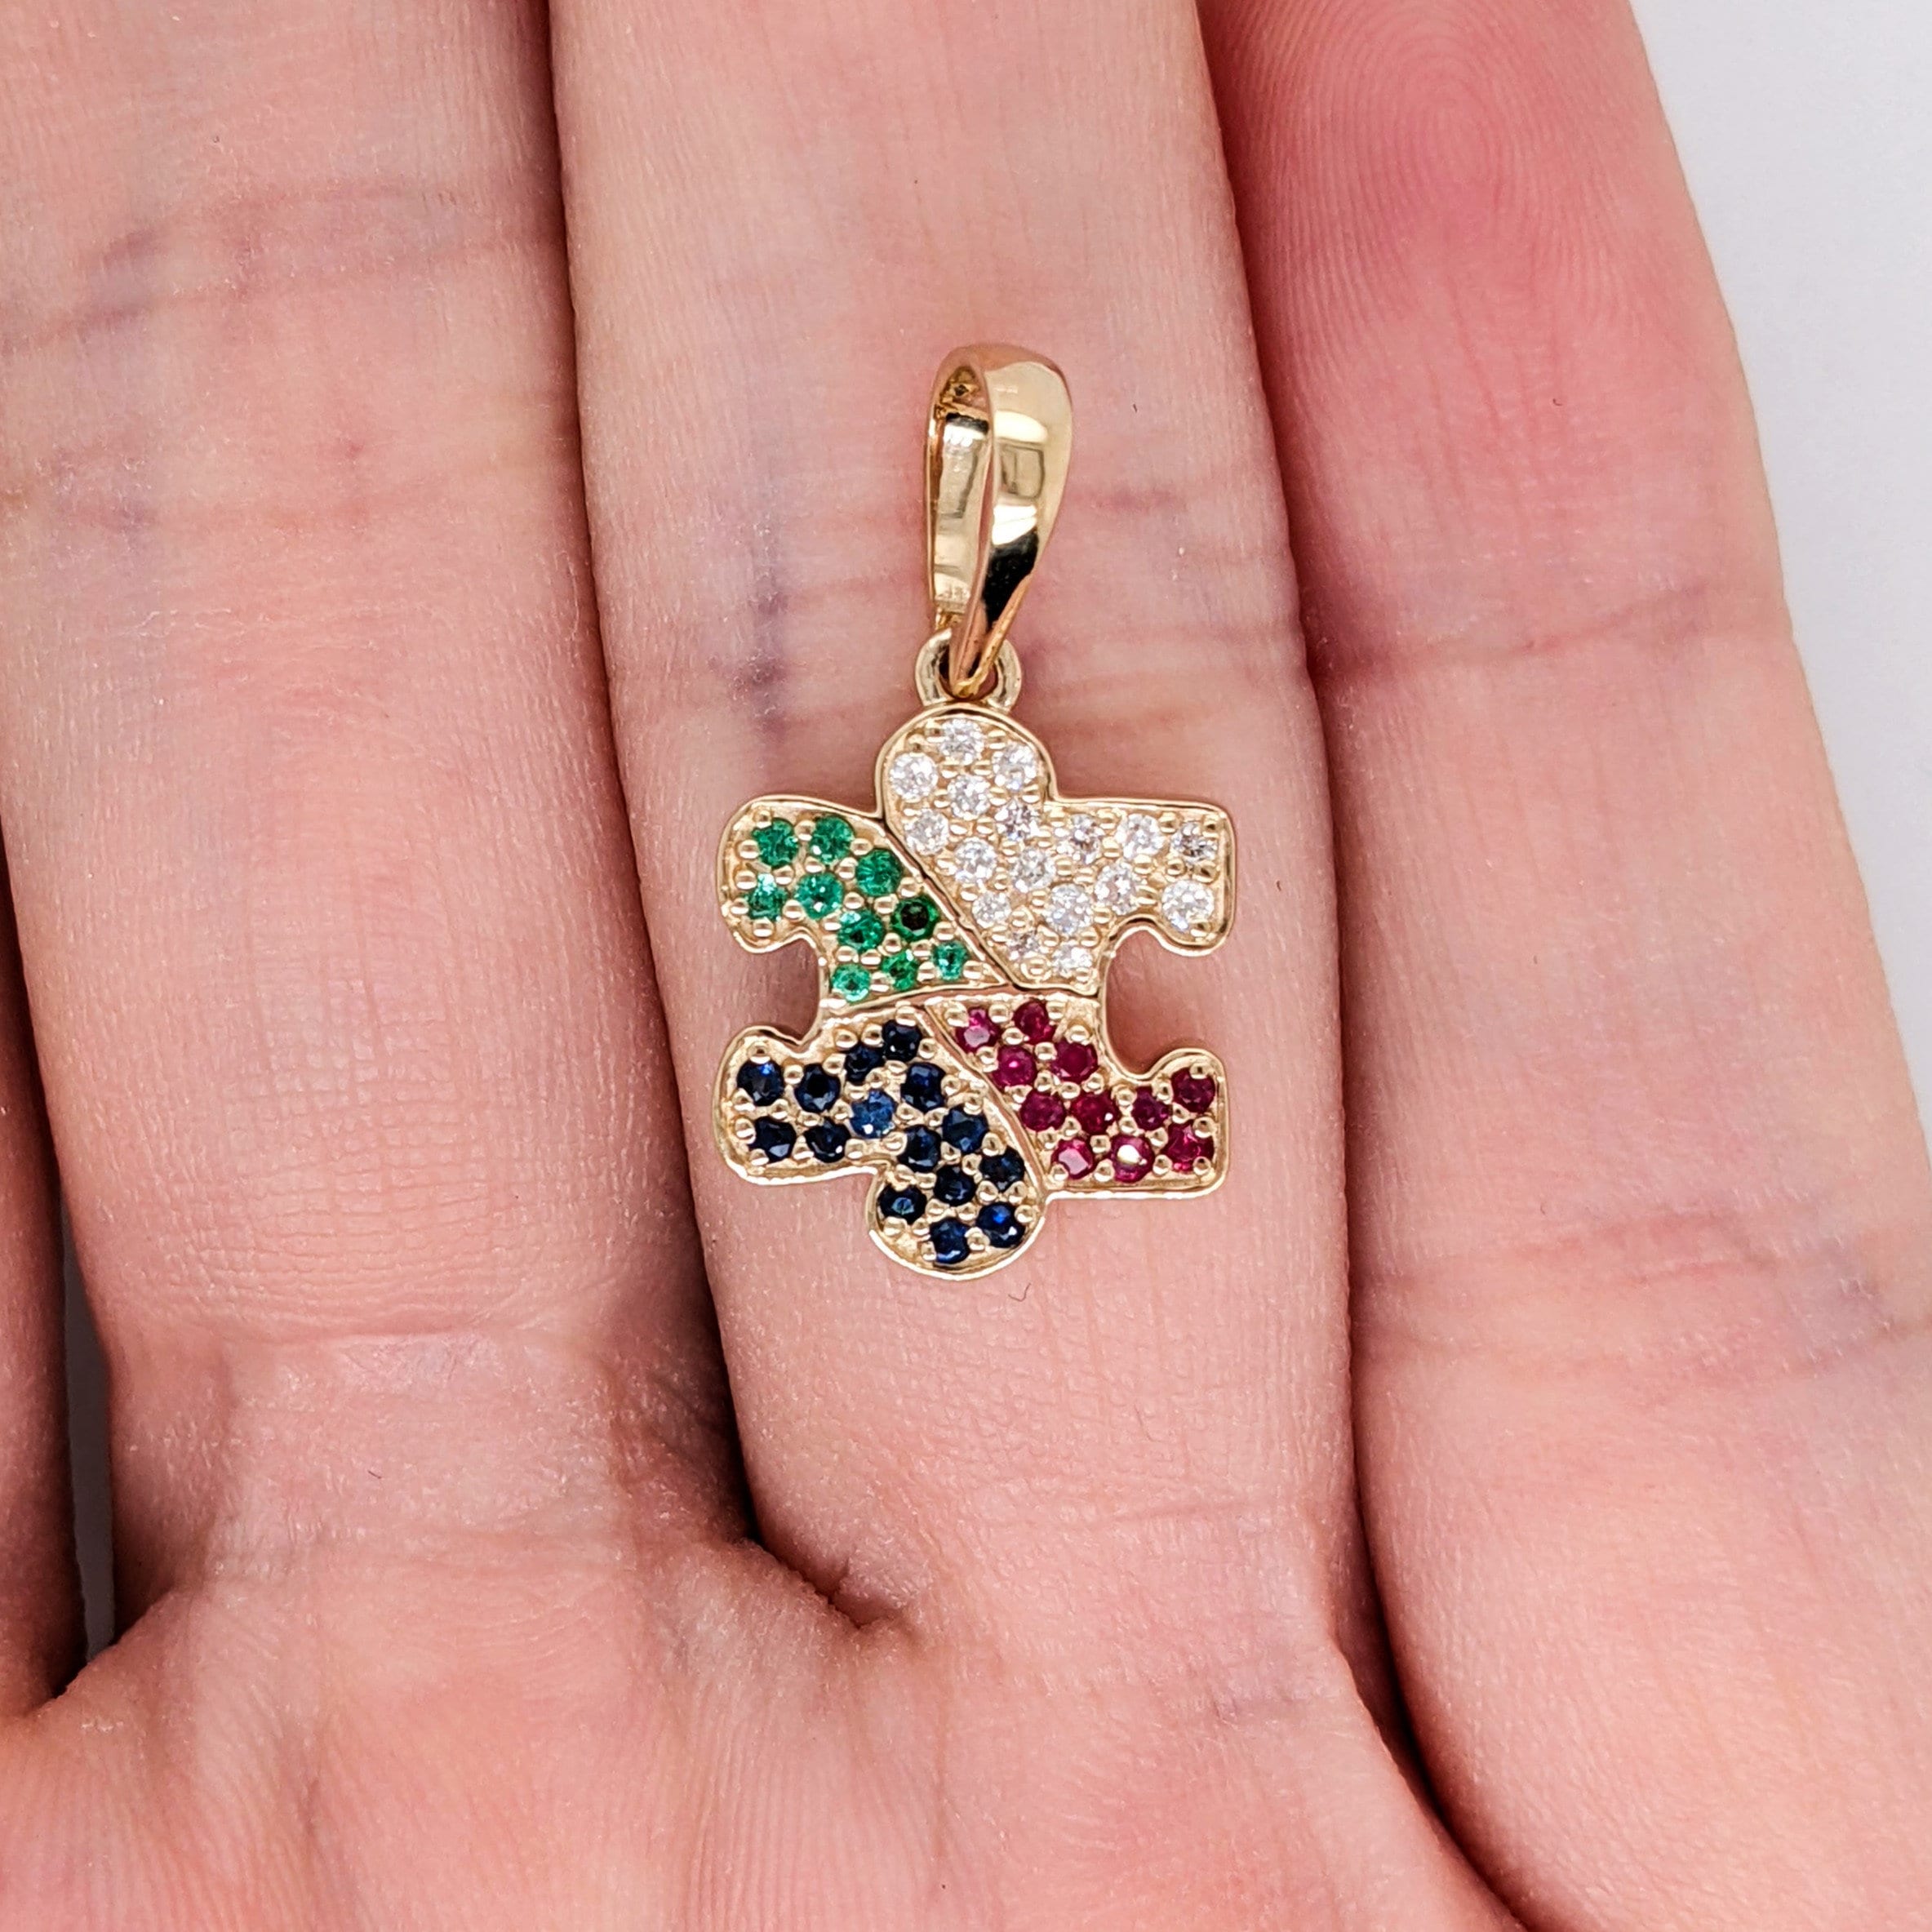 Autism Awareness Pendant in 14k Solid Gold with Sapphire, Emerald, Ruby, and Diamond Accents | 14k Gold Chain | Puzzle Piece Design